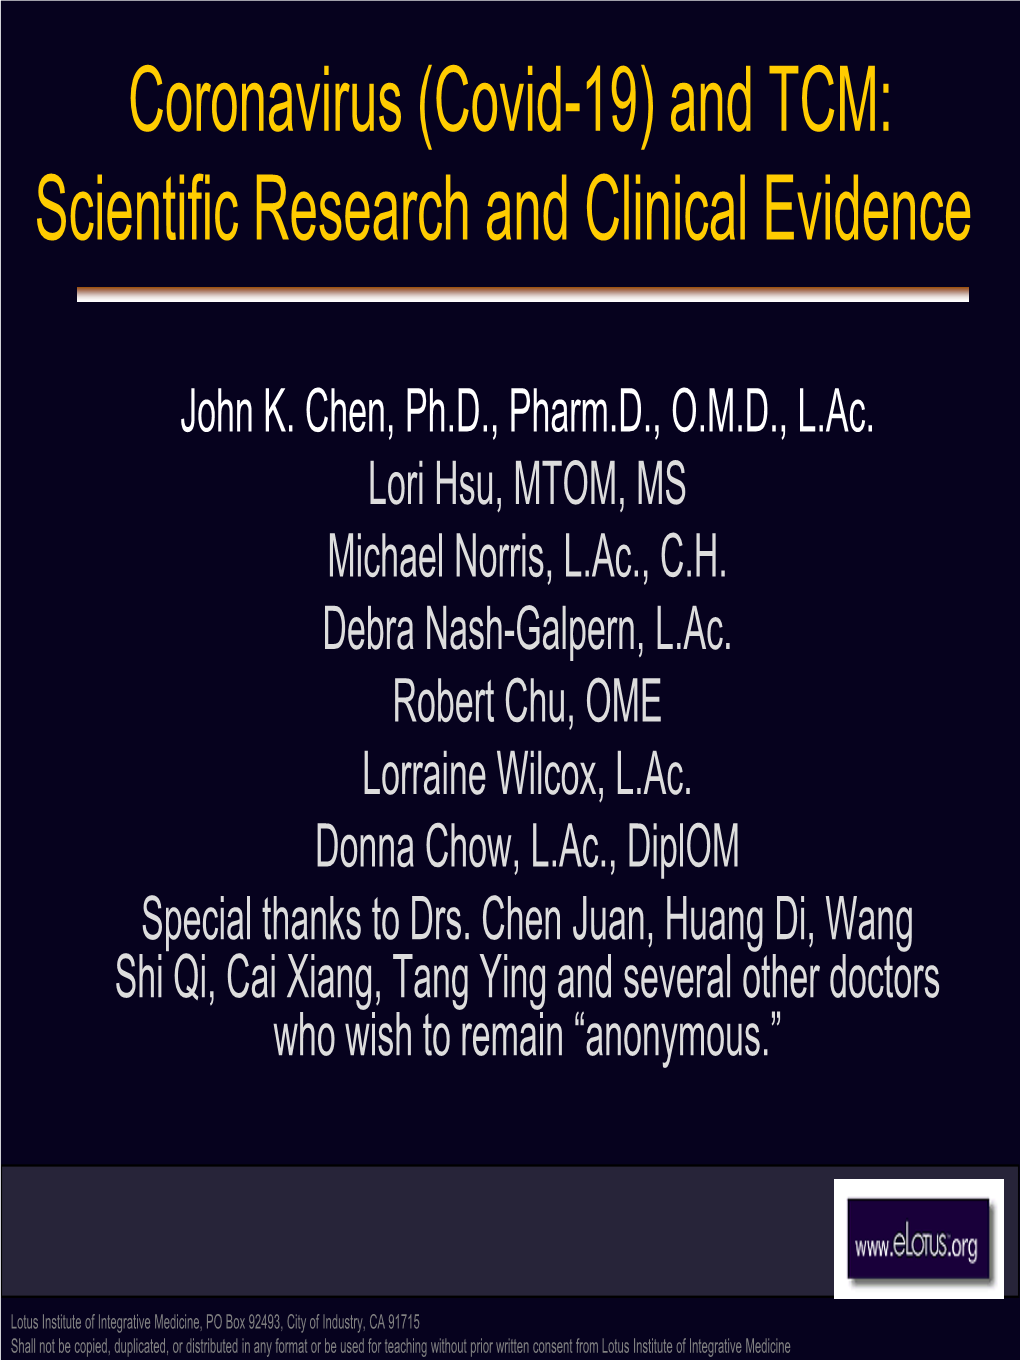 (Covid-19) and TCM: Scientific Research and Clinical Evidence